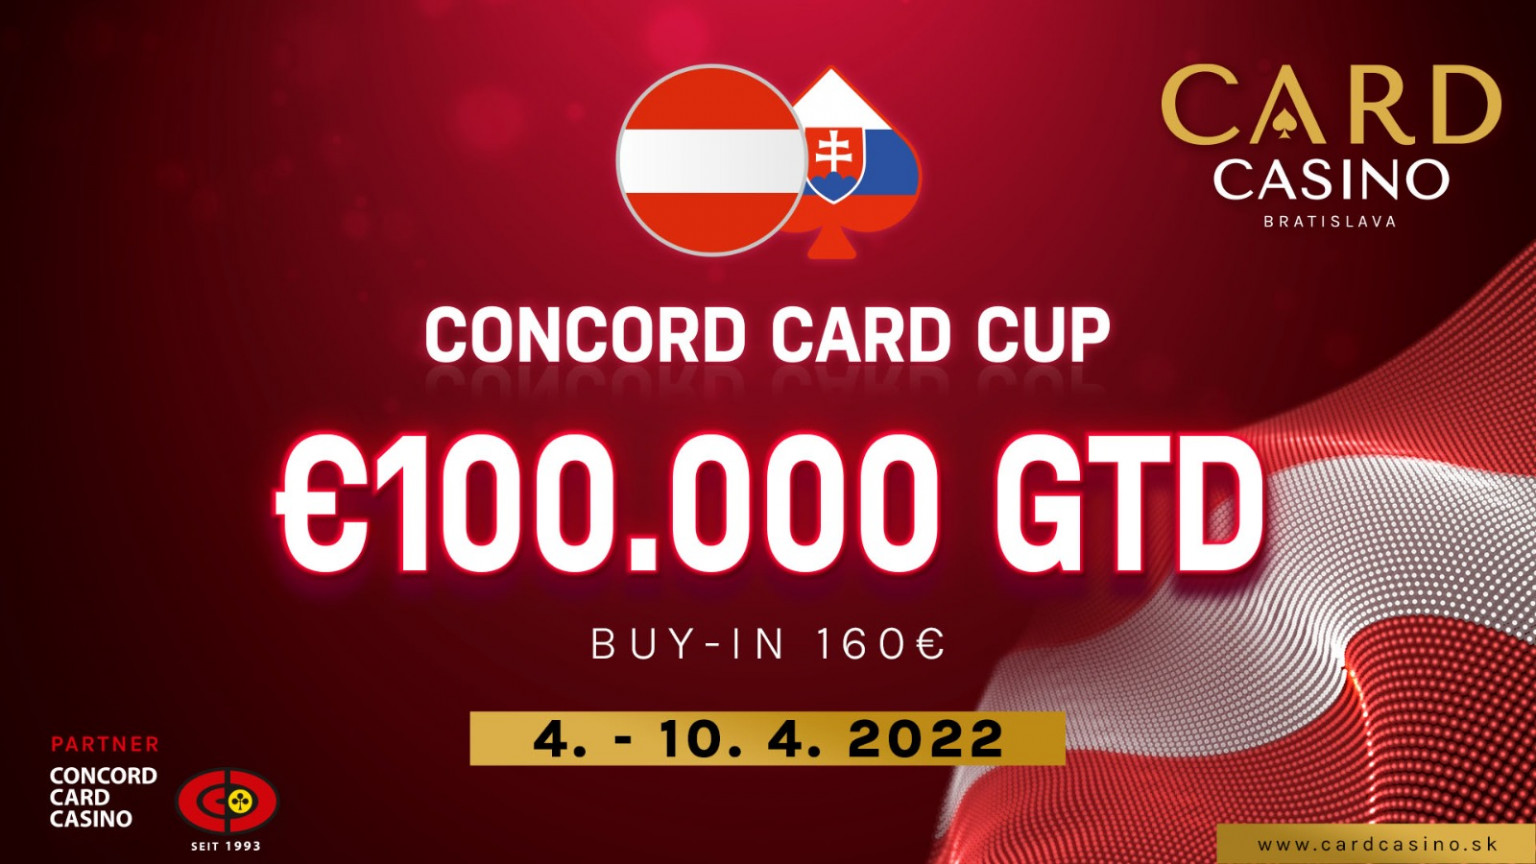 Great news for the poker community! Concord Card Casino will once again be on the poker map